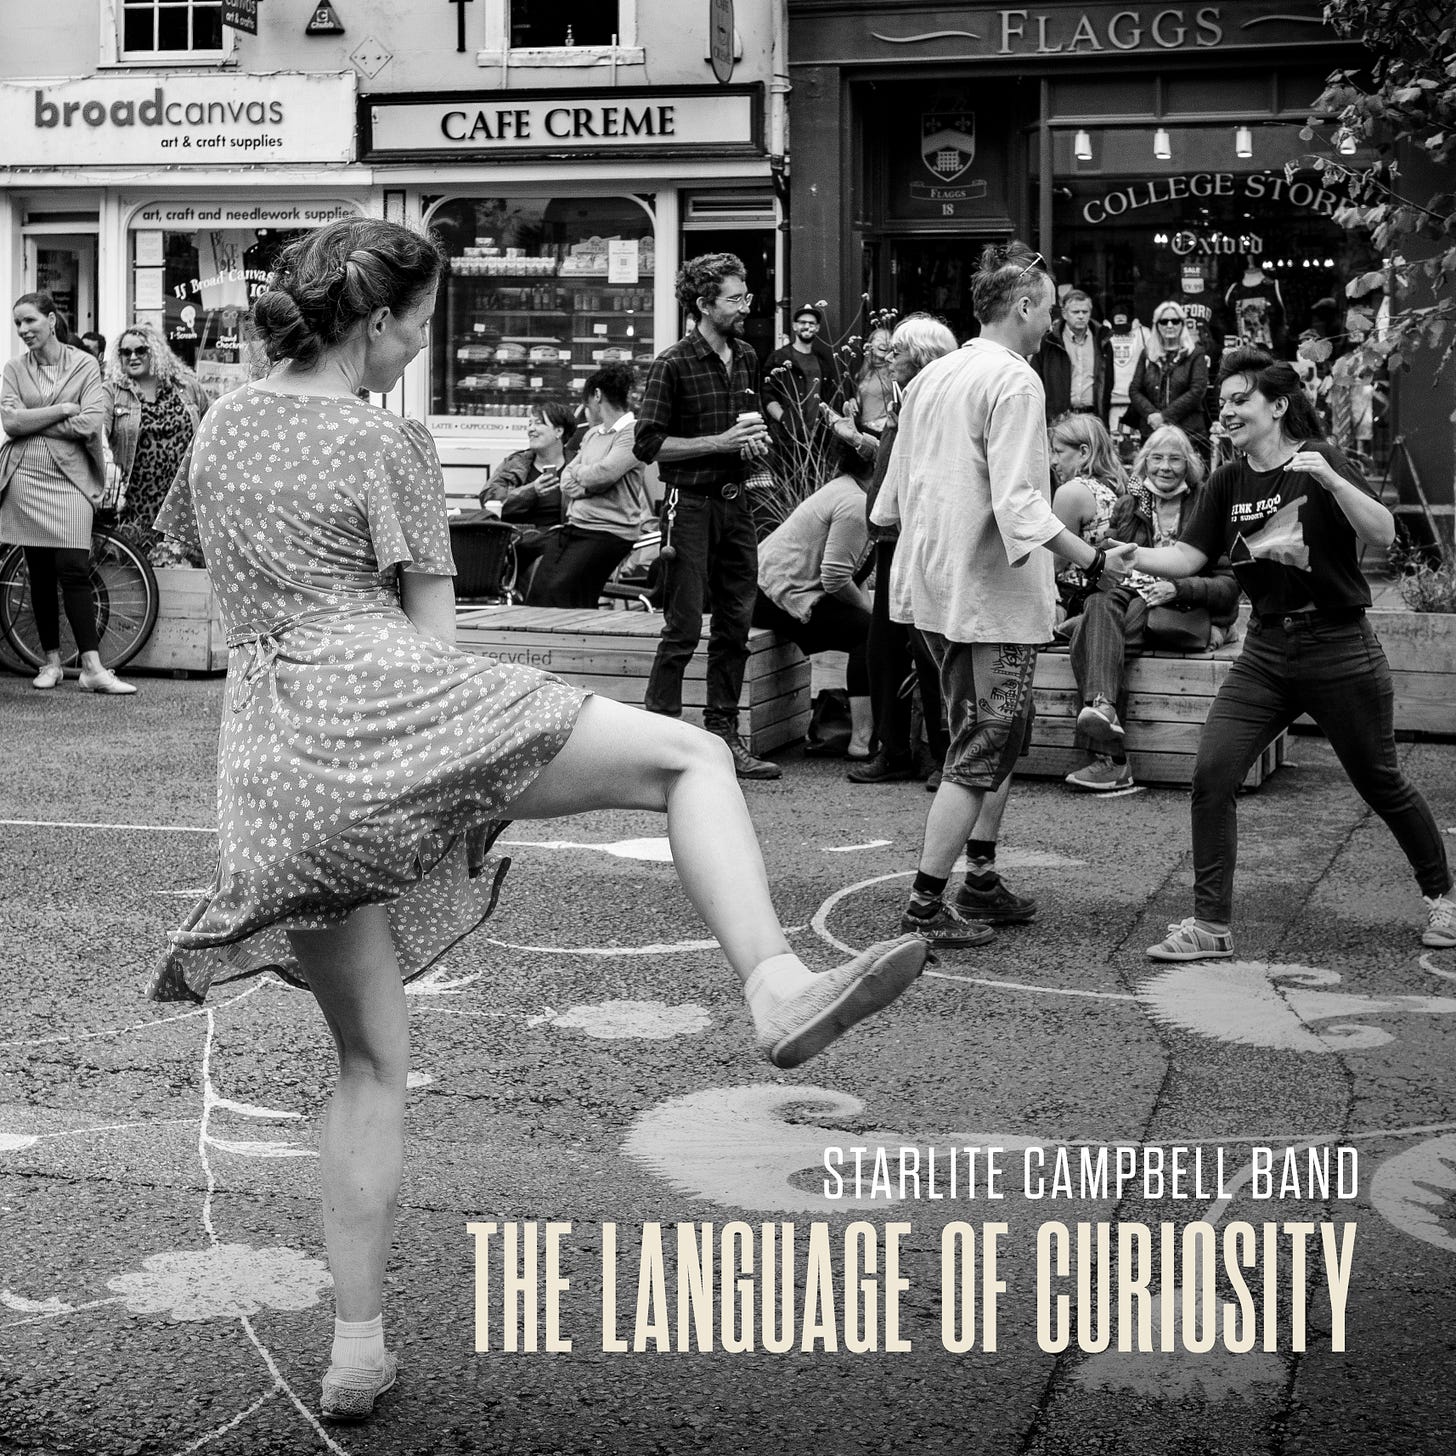 Album cover for 'The Language of Curiosity'. Photo by Stuart Bebb of Oxford Camera